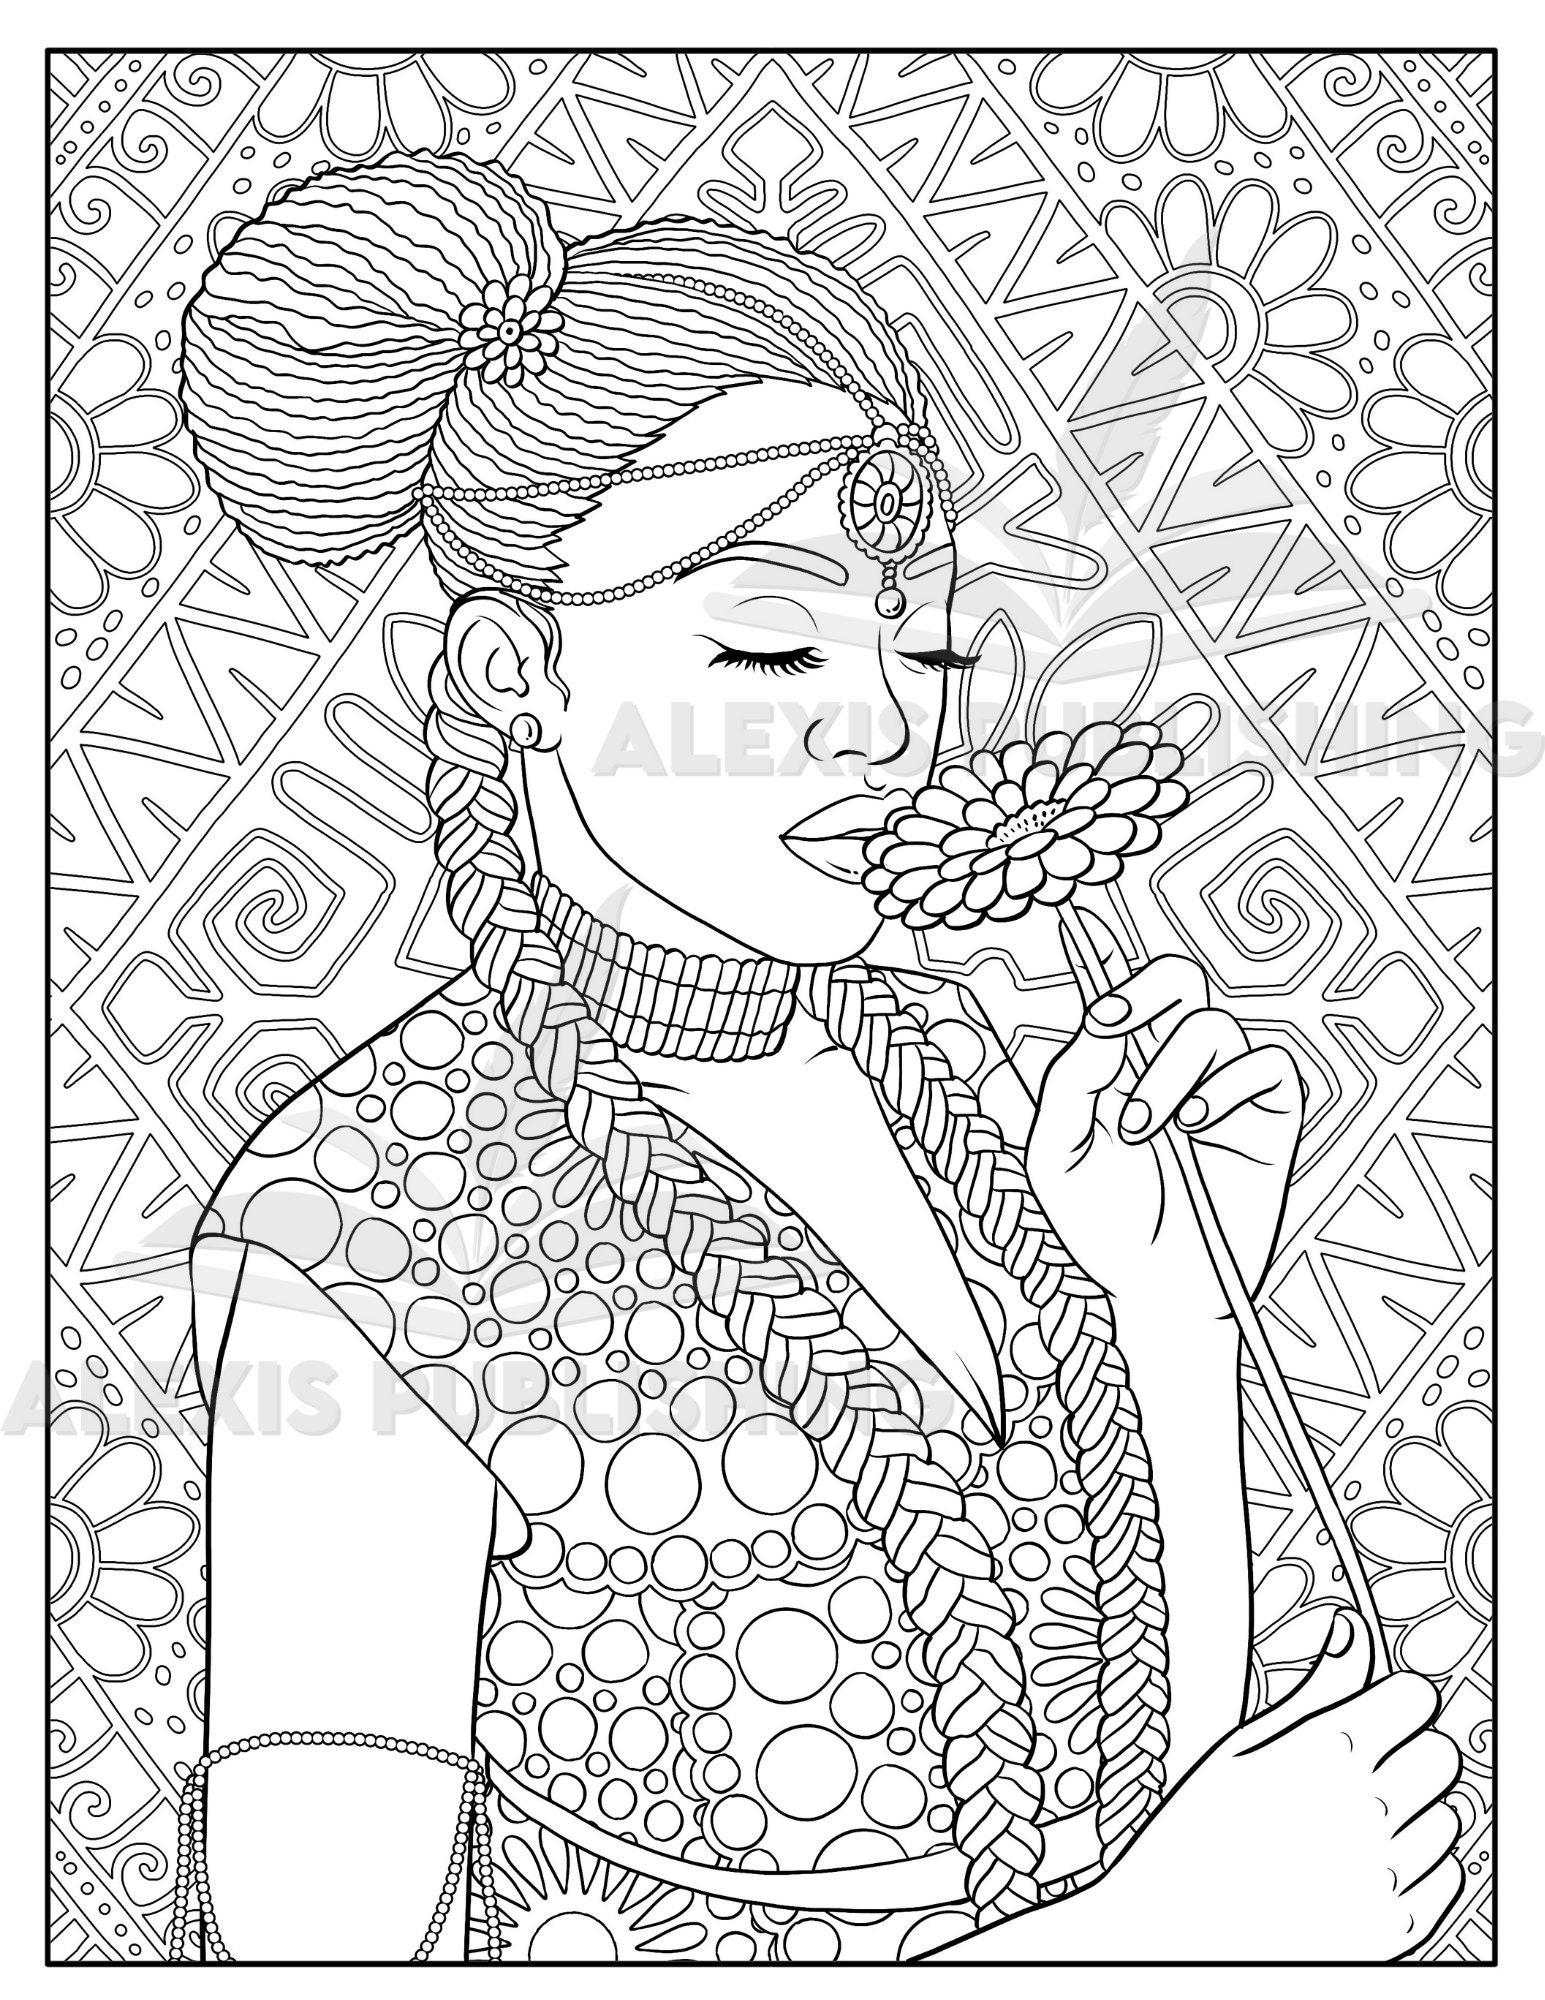 Africa Adults Coloring Book: african black women country tribal for adults  relaxation art large creativity grown ups coloring relaxation stress rel  (Paperback)